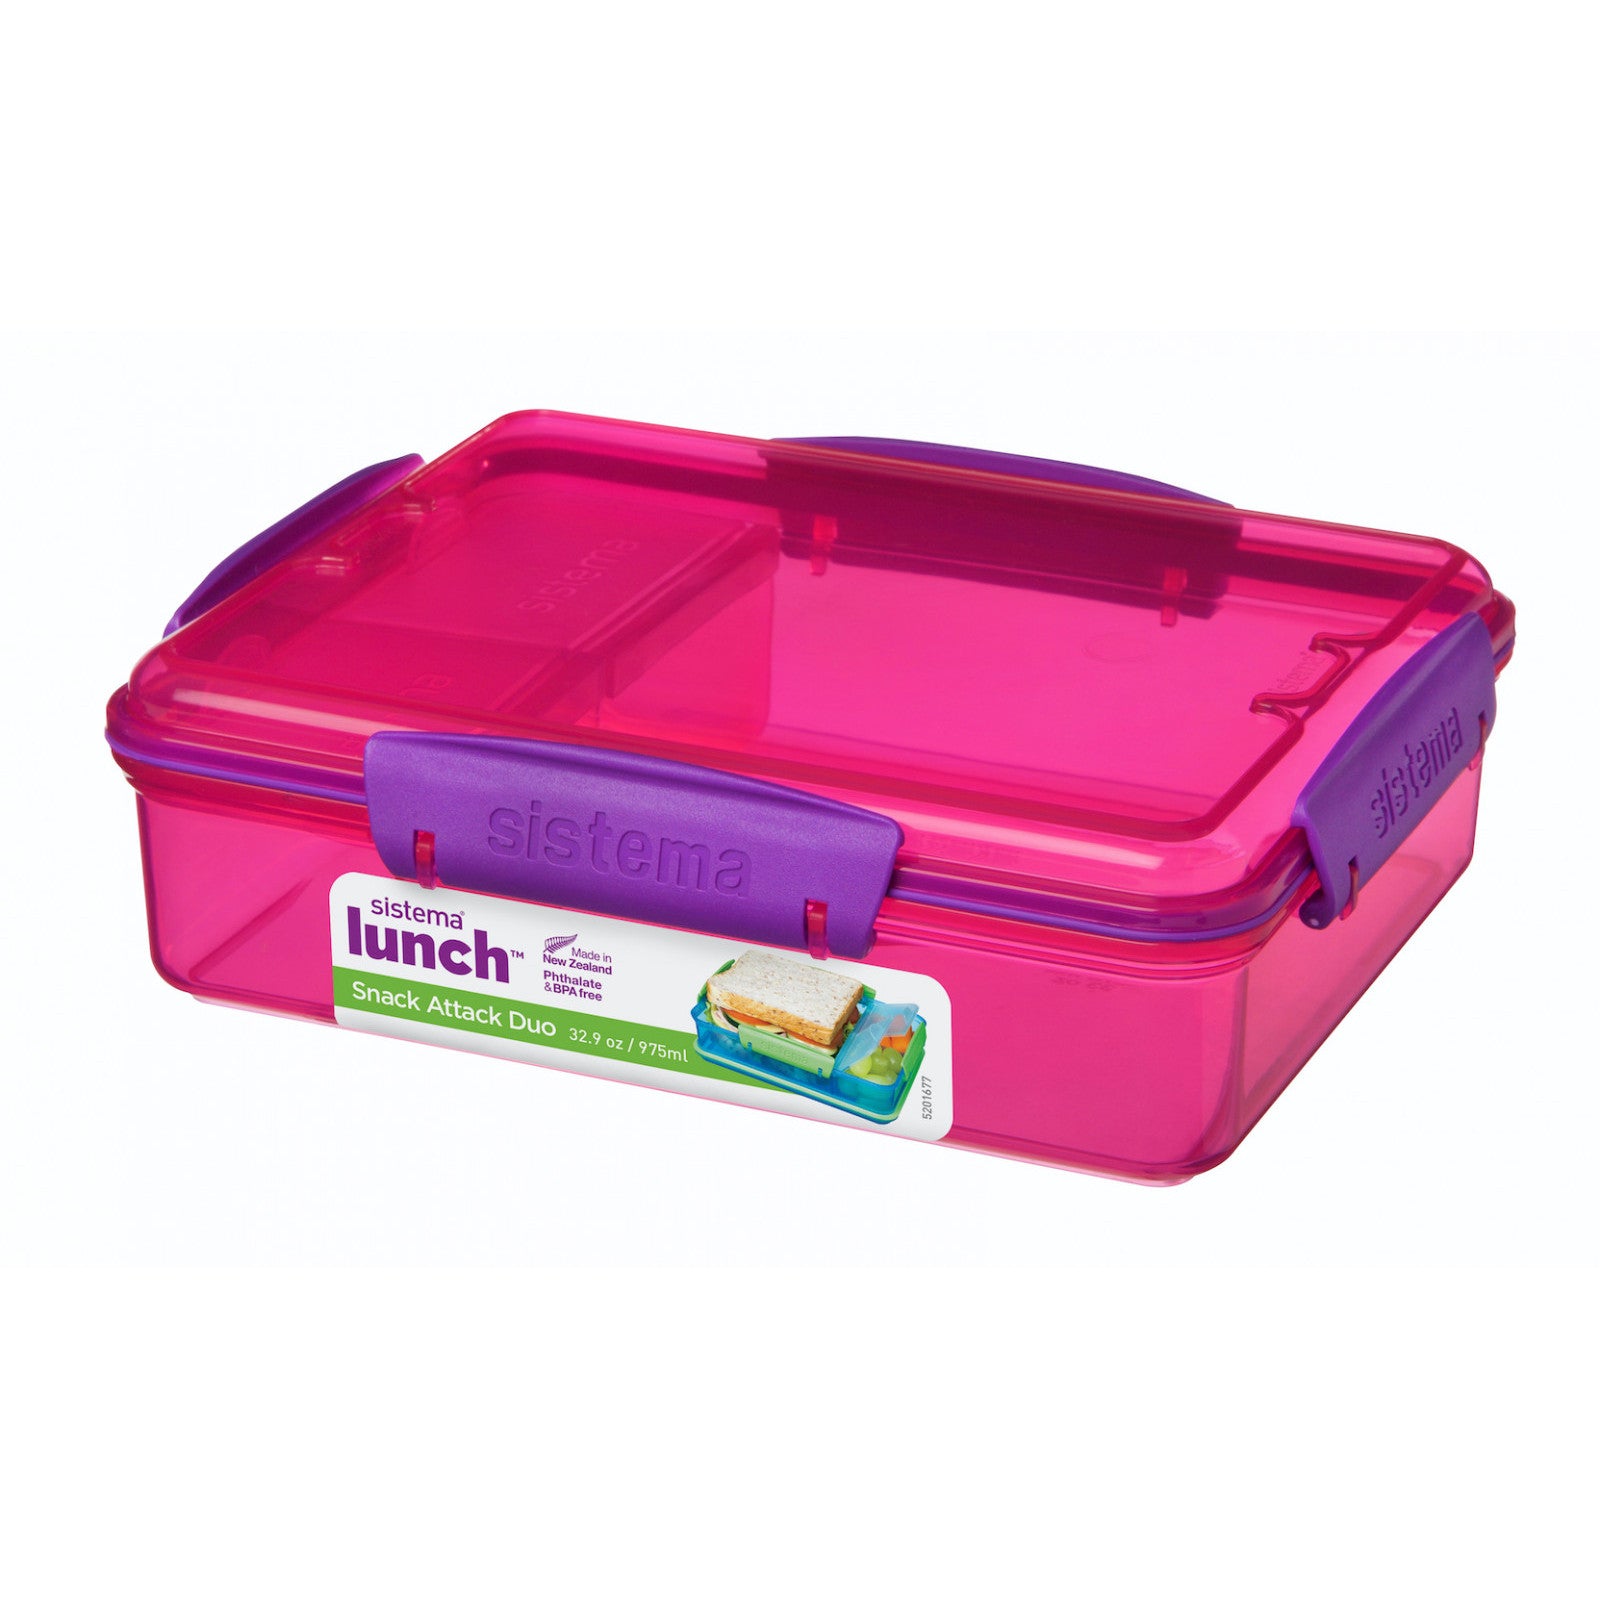 Sistema Lunchbox - Snack Attack Duo - 975 mL - Pink